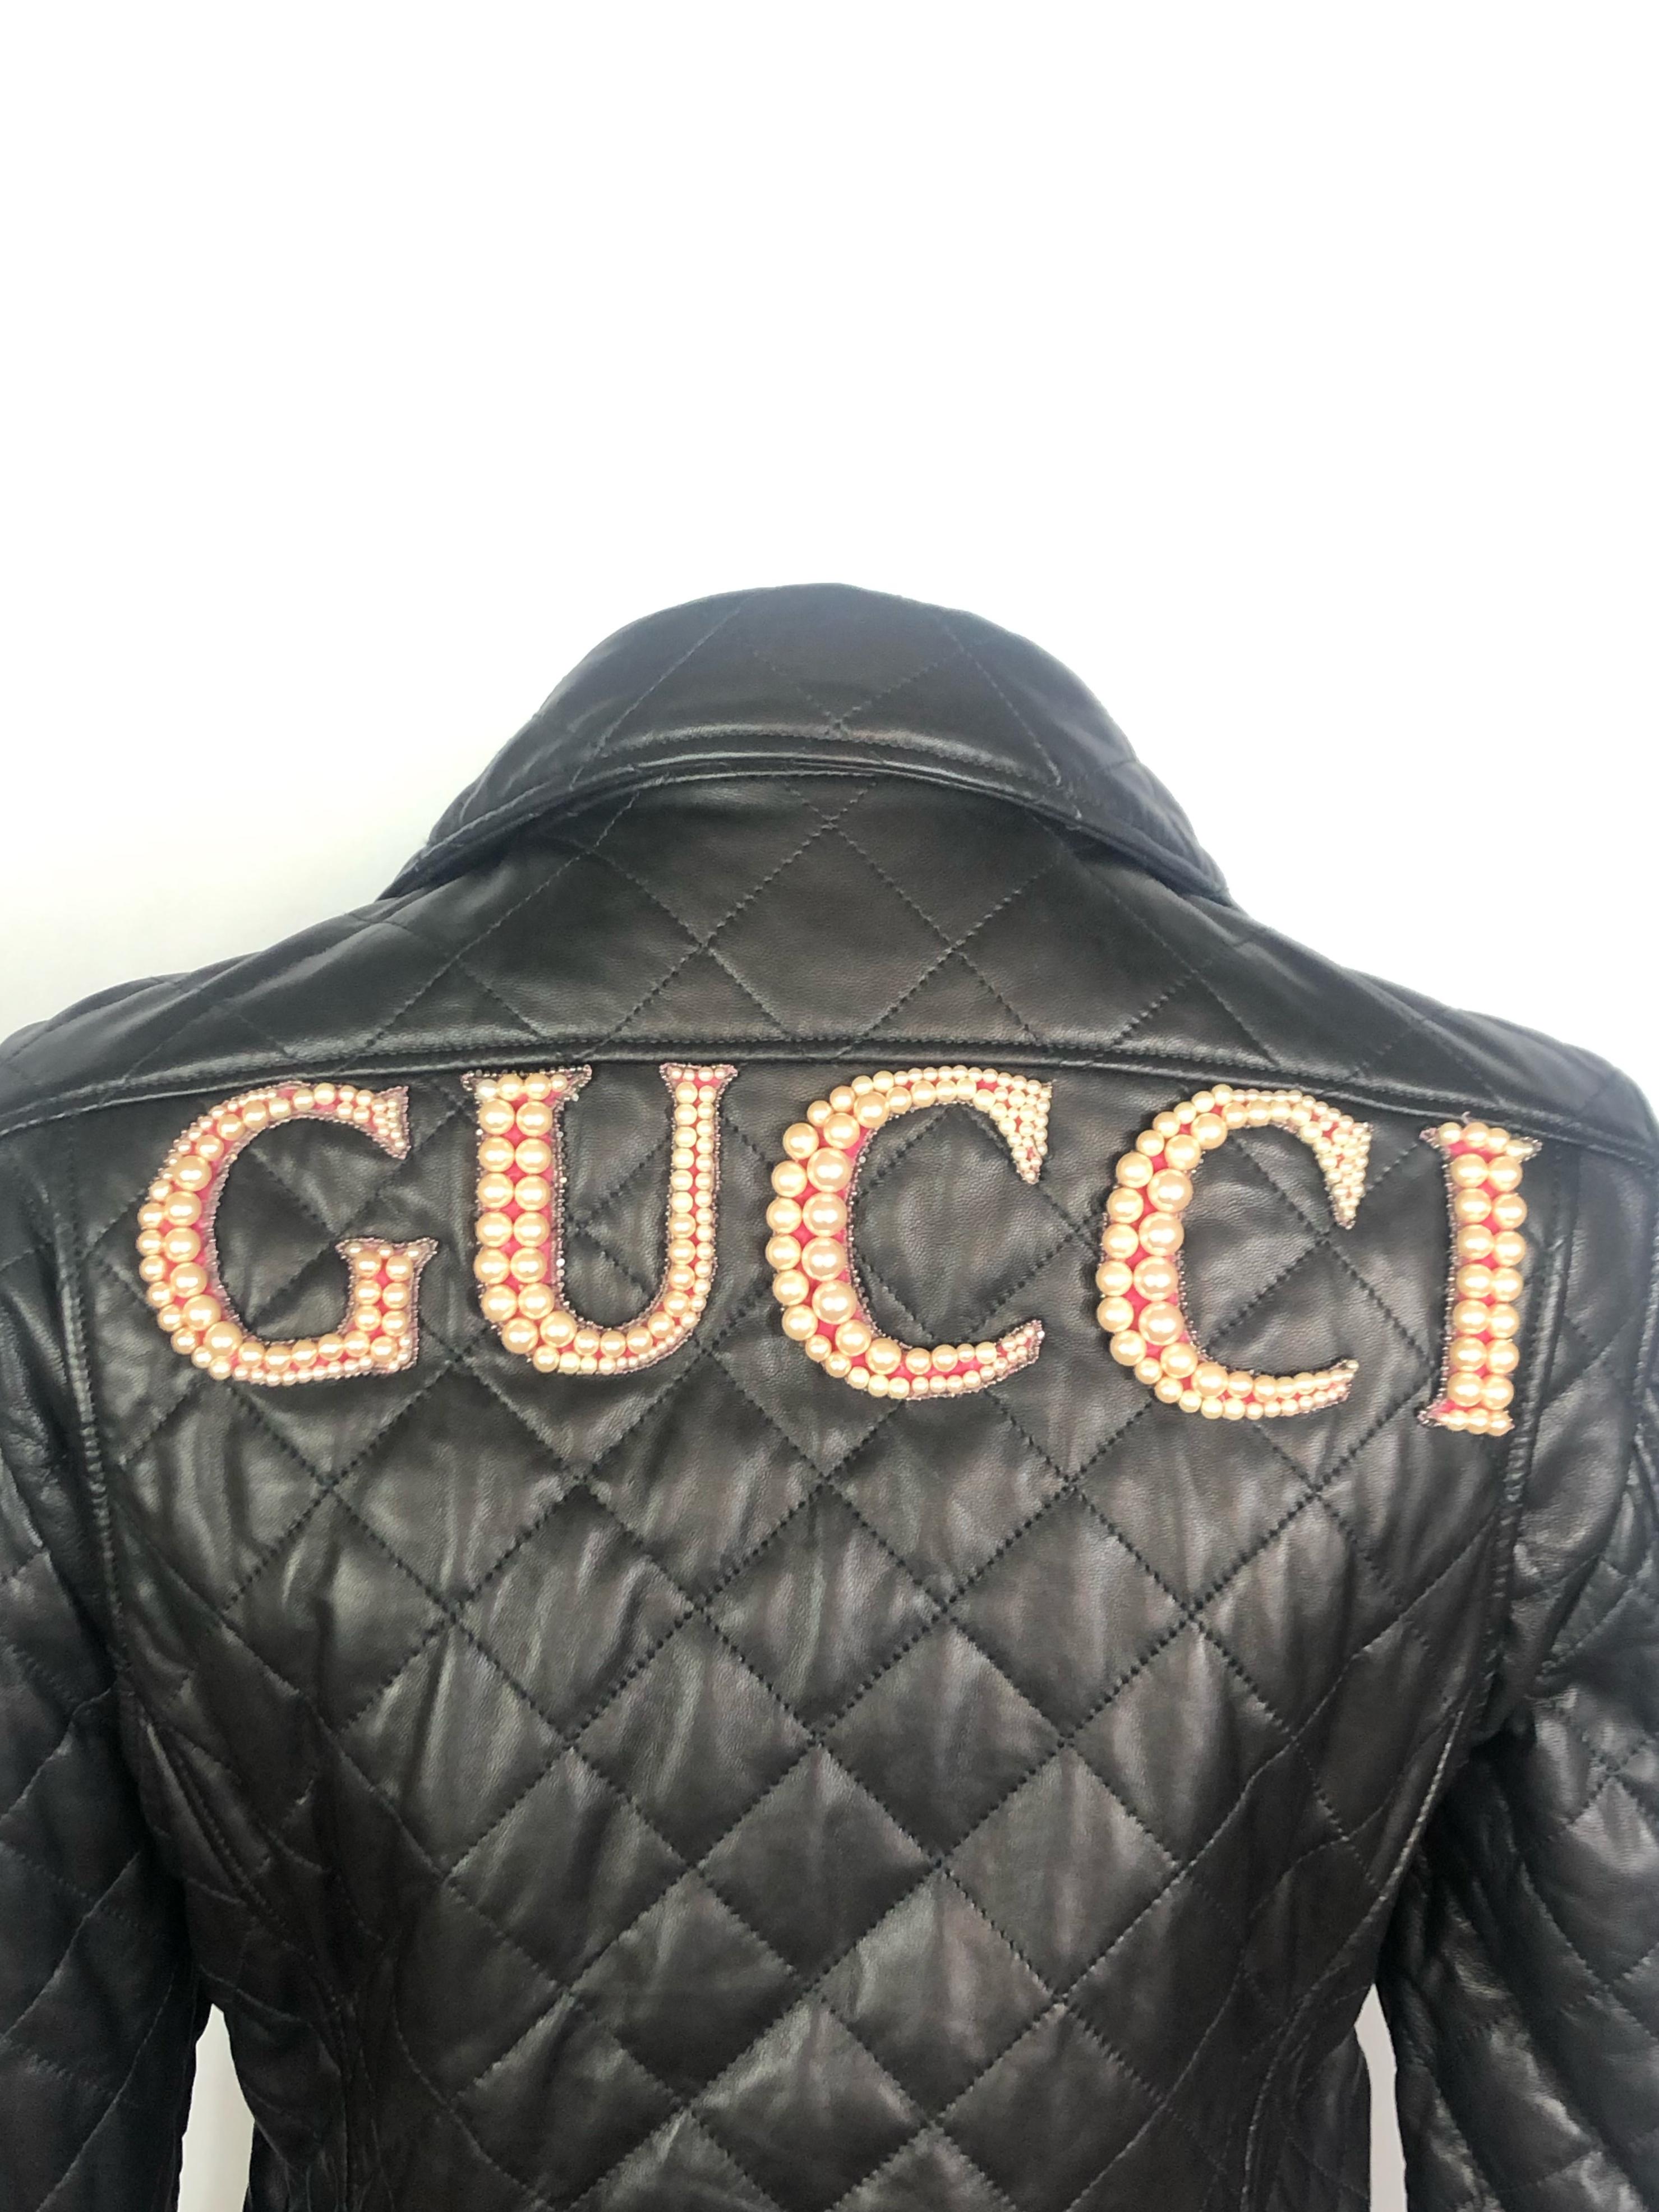 GUCCI Brown Leather Moto Jacket w/ Pearls Size 44

Product details:
Size is 44
Shoulder to shoulder measures 16.5”
Brown stitched leather jacket 
featuring silver-tone metal detail, all stamped with GUCCI sign
Double buckles on each side 
Zipper